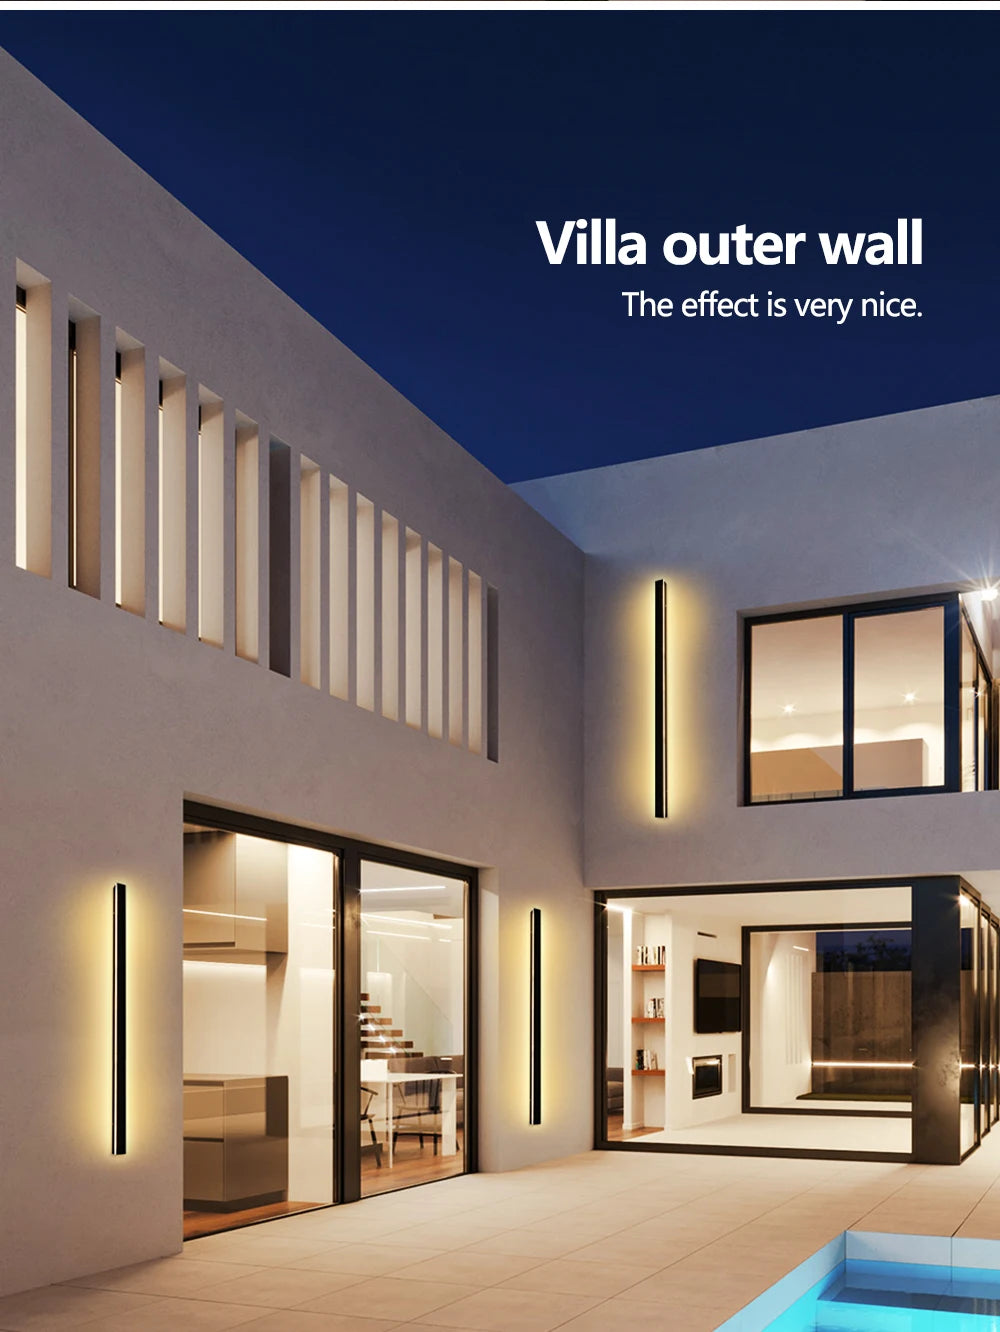 LUCKYLED Modern Led Wall Light, Elegant outdoor lighting for villa exterior walls, creating a lovely ambiance.